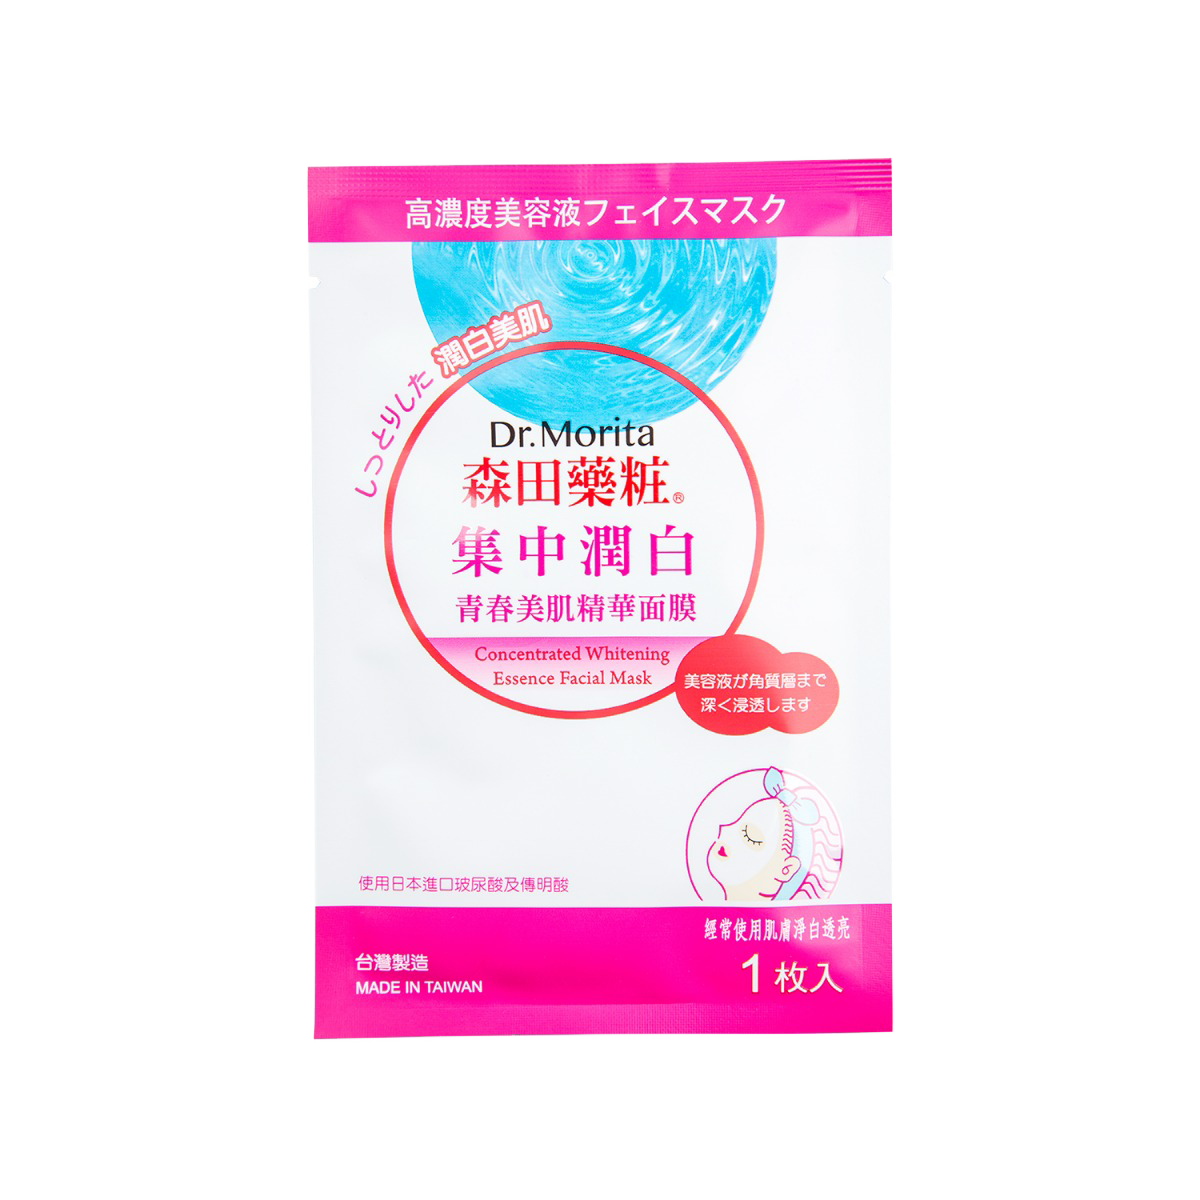 So Sánh Giá Concentrated Whitening Essencen Facial Mask